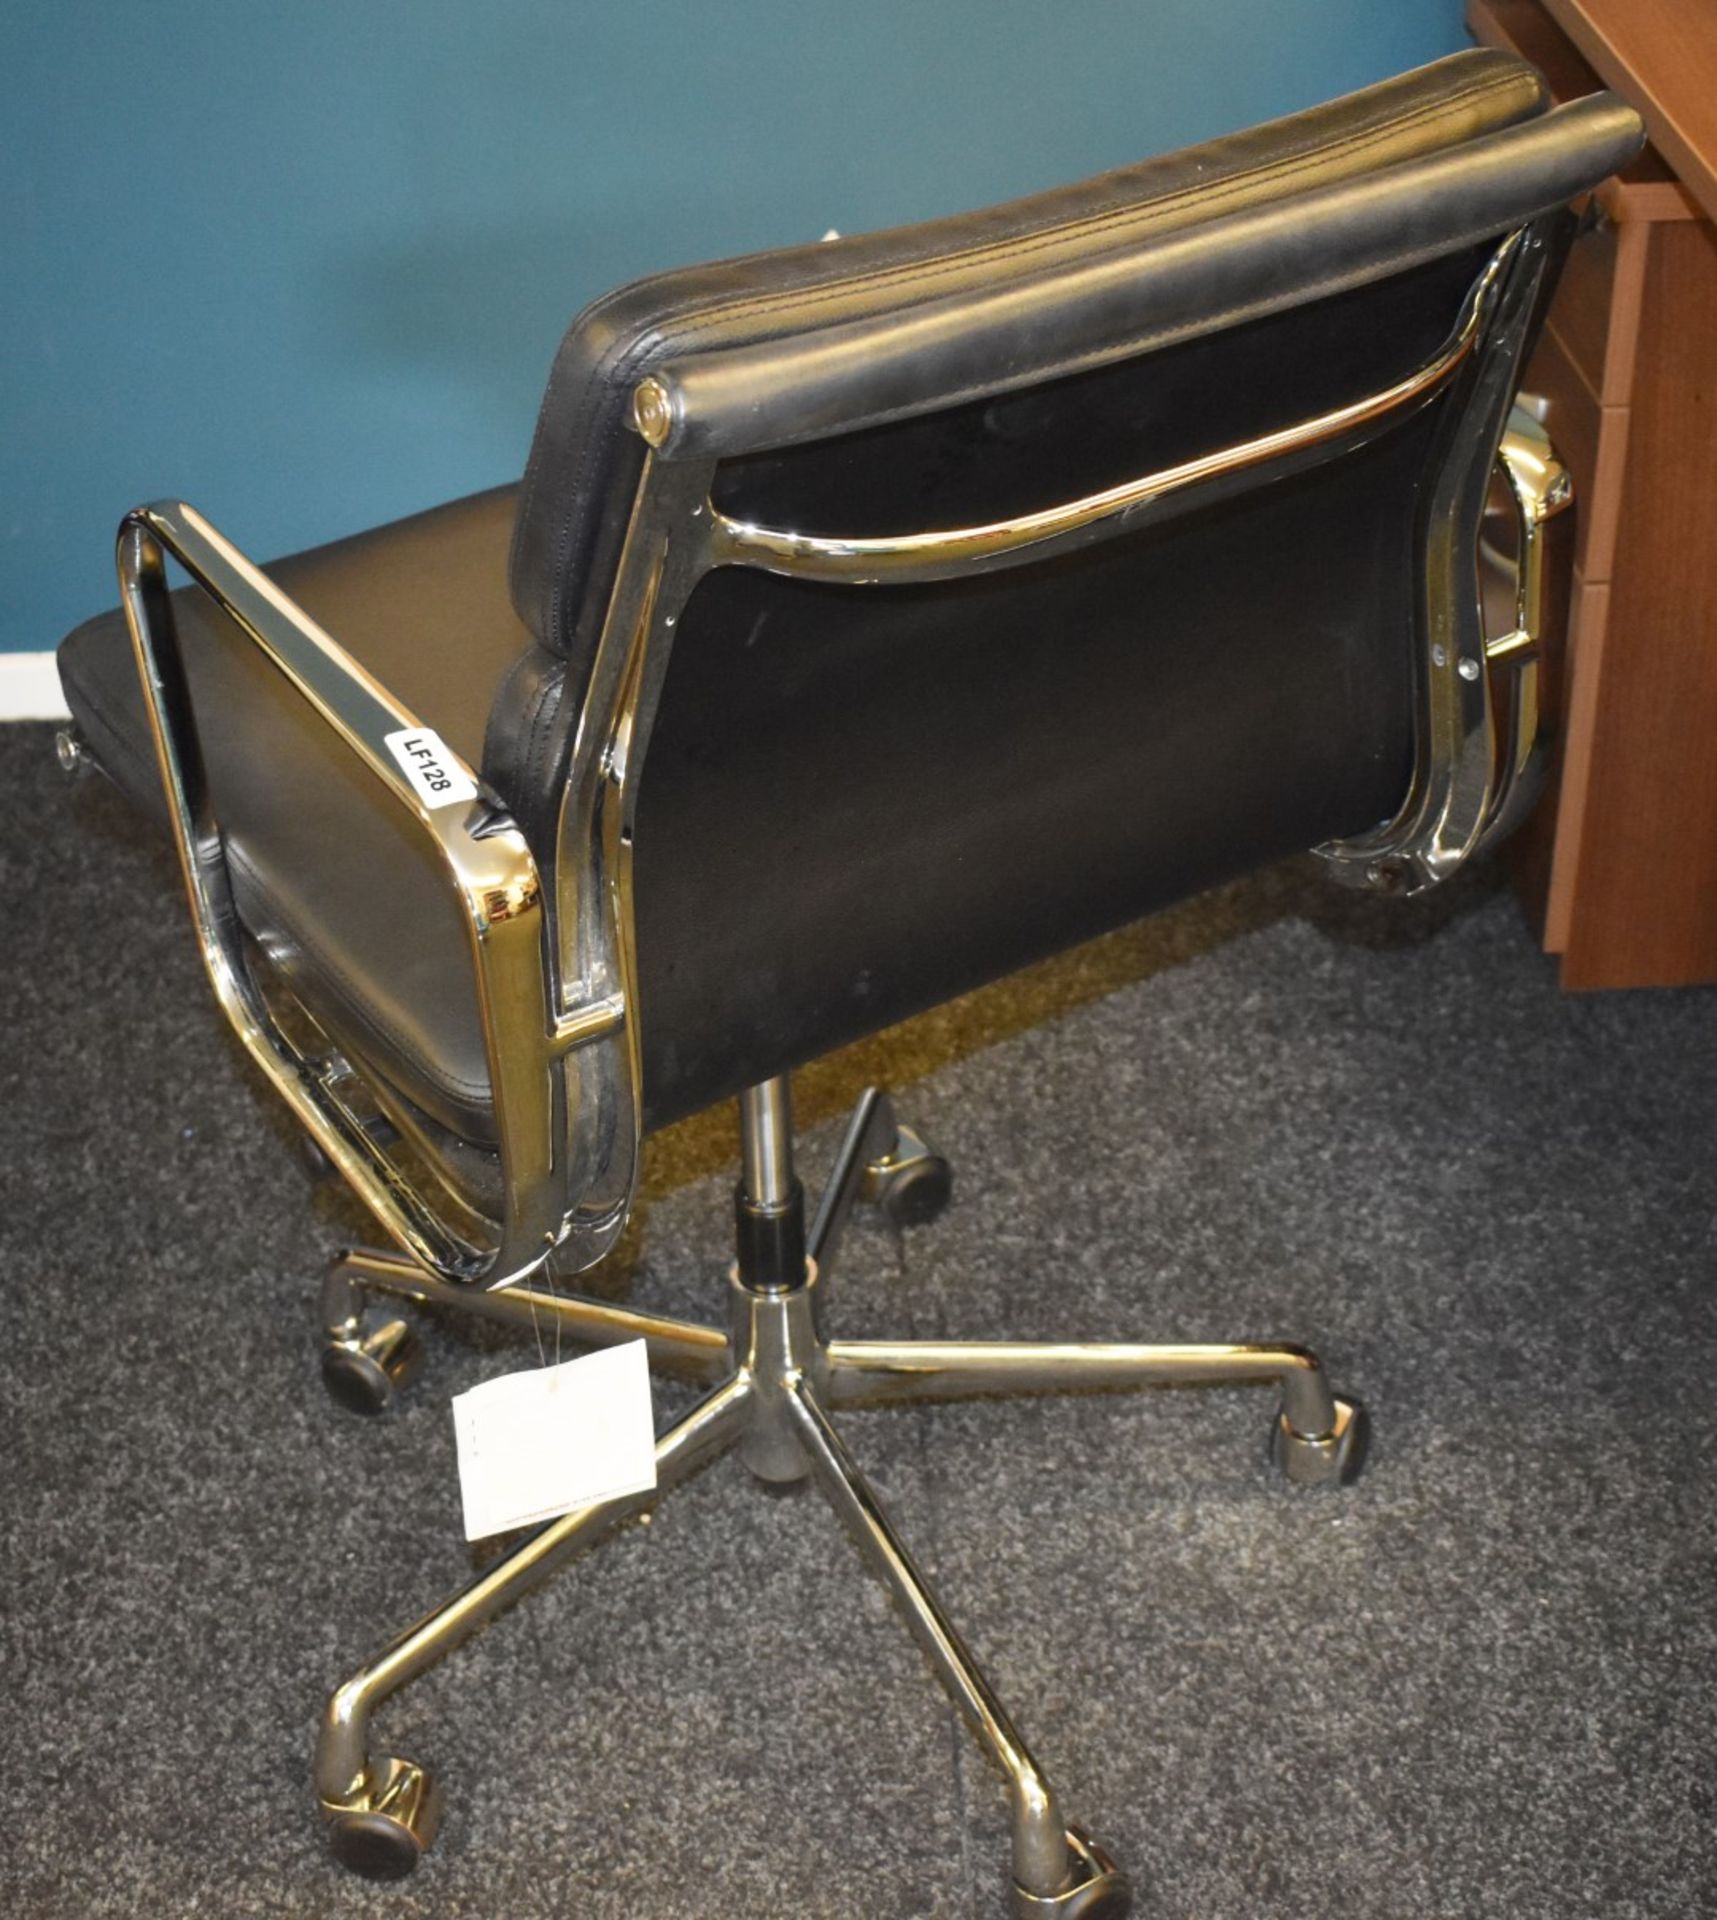 1 x Eames Inspired Office Chair - Swivel Office Chair Upholstered in Black Leather - Image 4 of 4